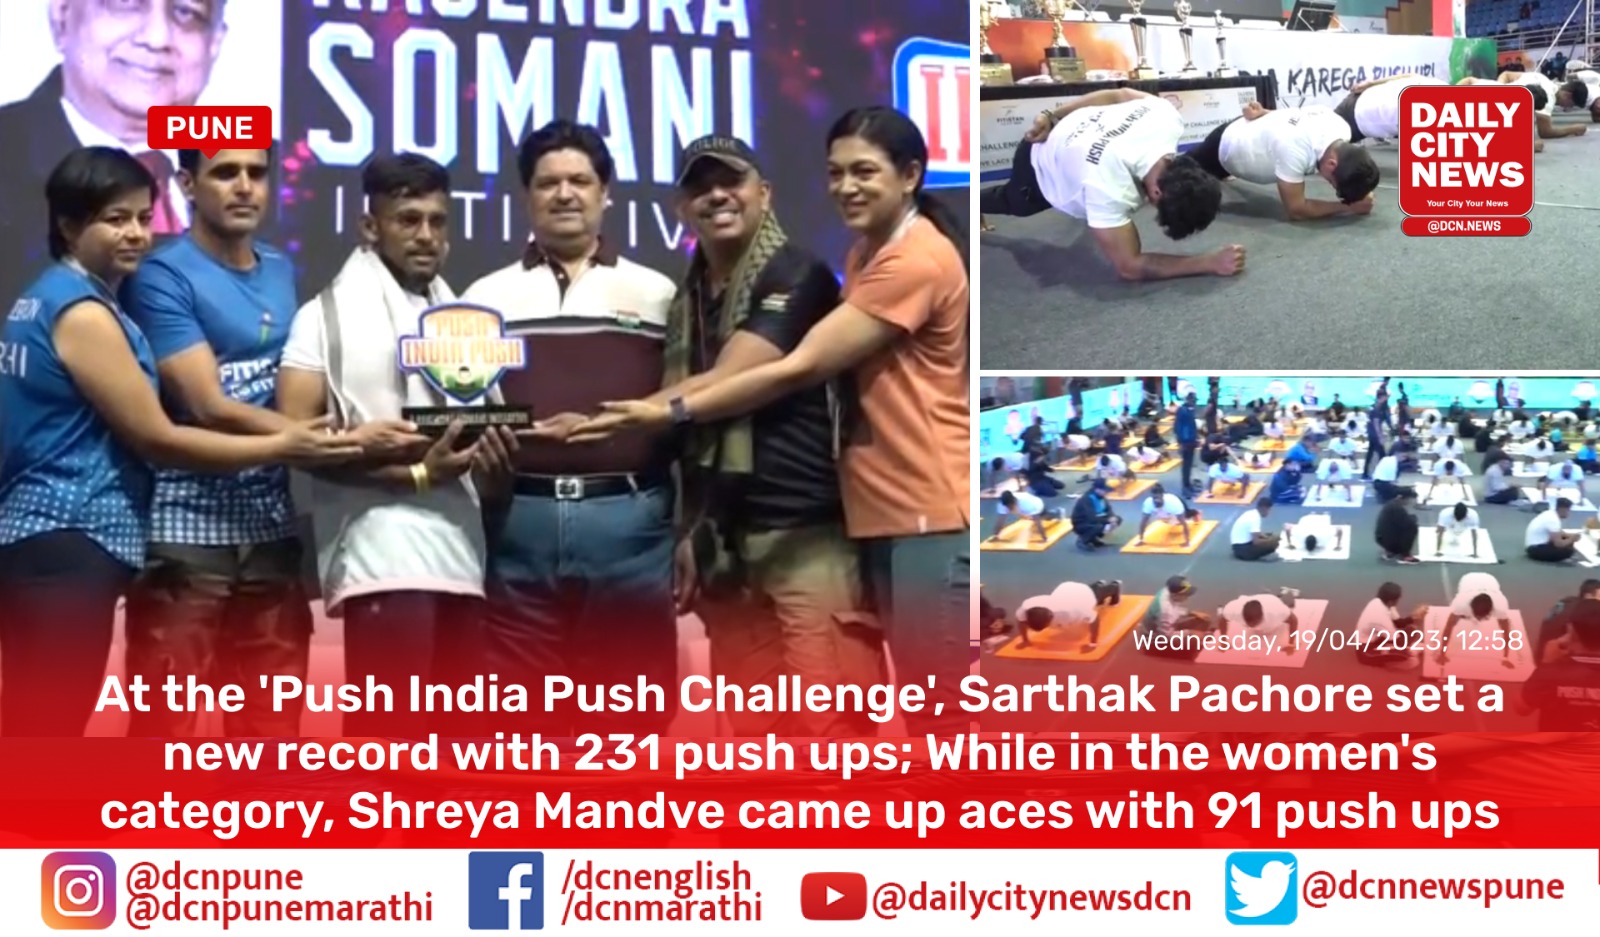 At the 'Push India Push Challenge',  Sarthak Pachore set a new record with 231 push ups; While in the women's category, Shreya Mandve came up aces with 91 push ups